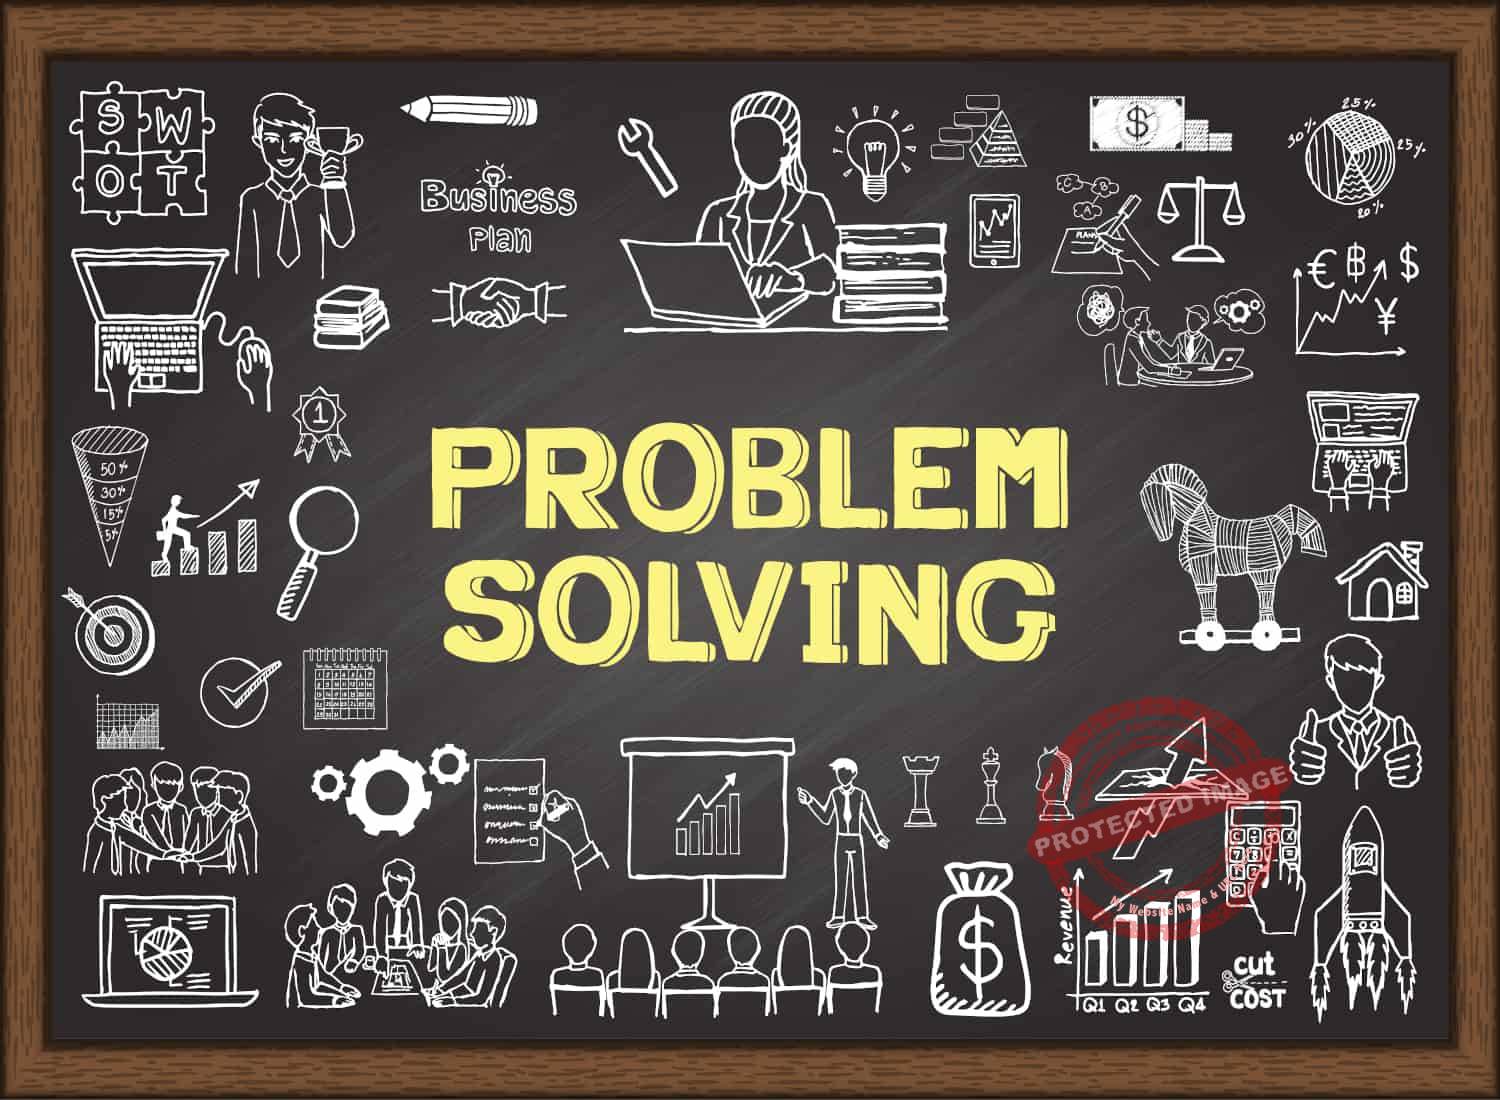 importance of problem solving activities